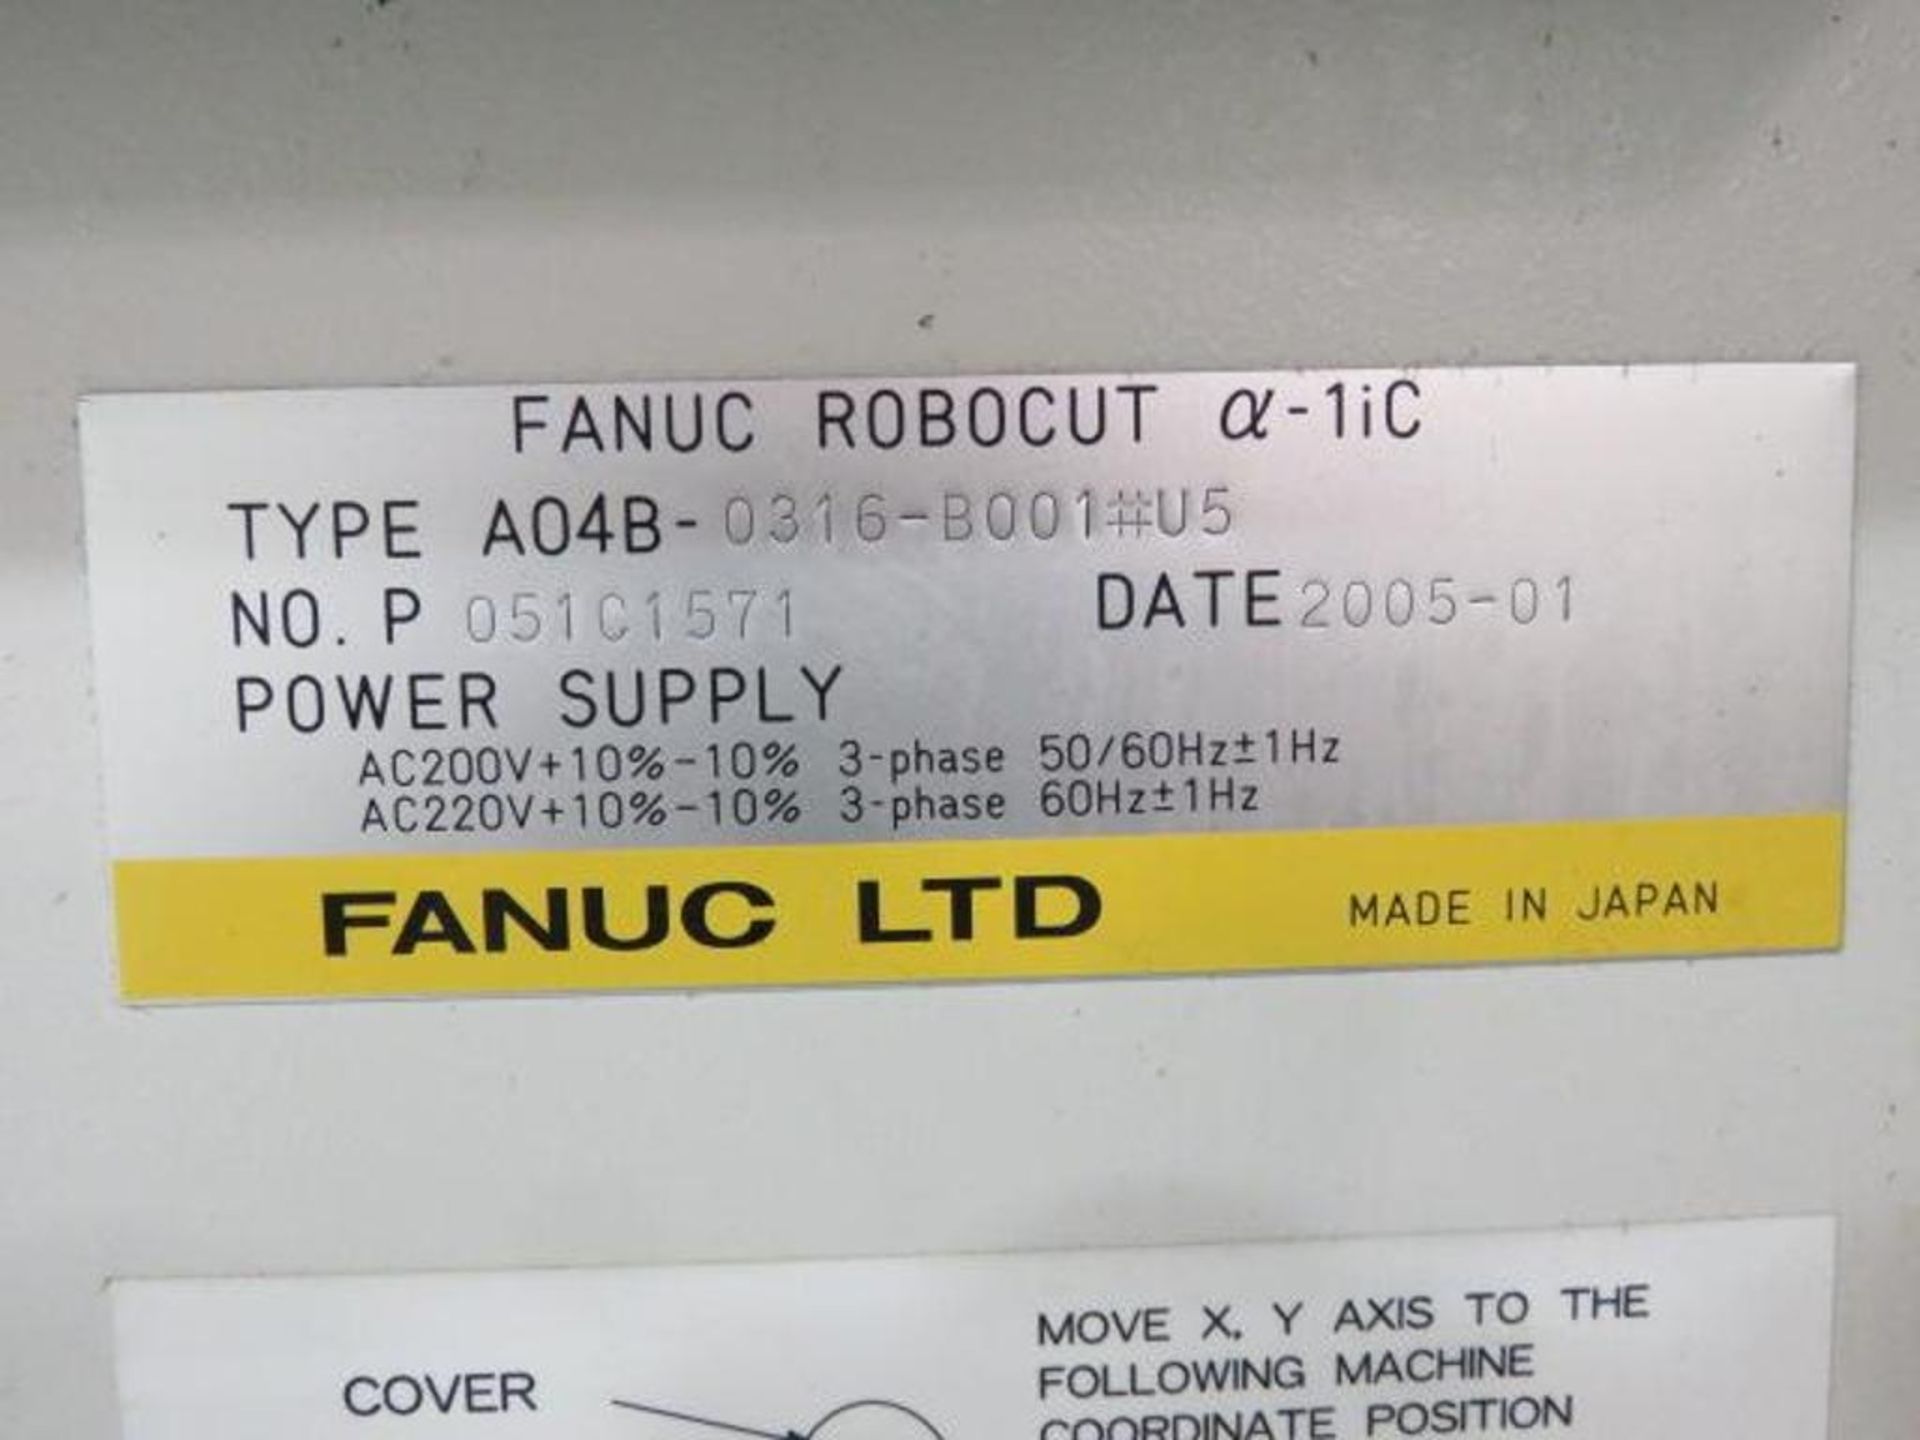 Fanuc 4-Axis CNC Wire EDM Machine Model Robocut AX-1iC, S/N P051C1571 (2005), 43 in. x 33 in. x 21 i - Image 6 of 6